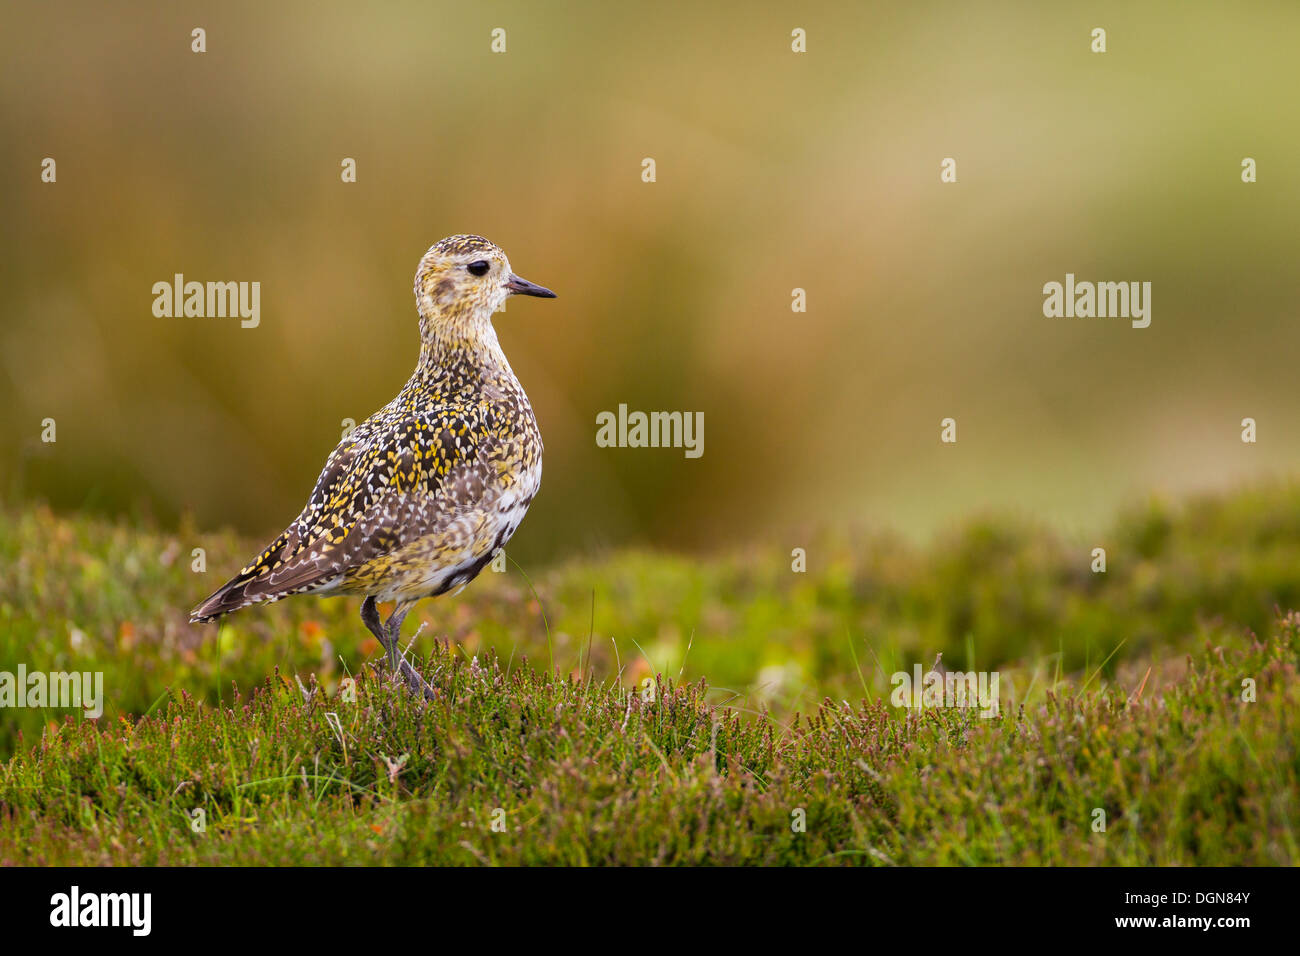 Golden Plover (Pluvialis apricaria) si fermò in heather moorland. Molla, Yorkshire Dales, UK. Foto Stock